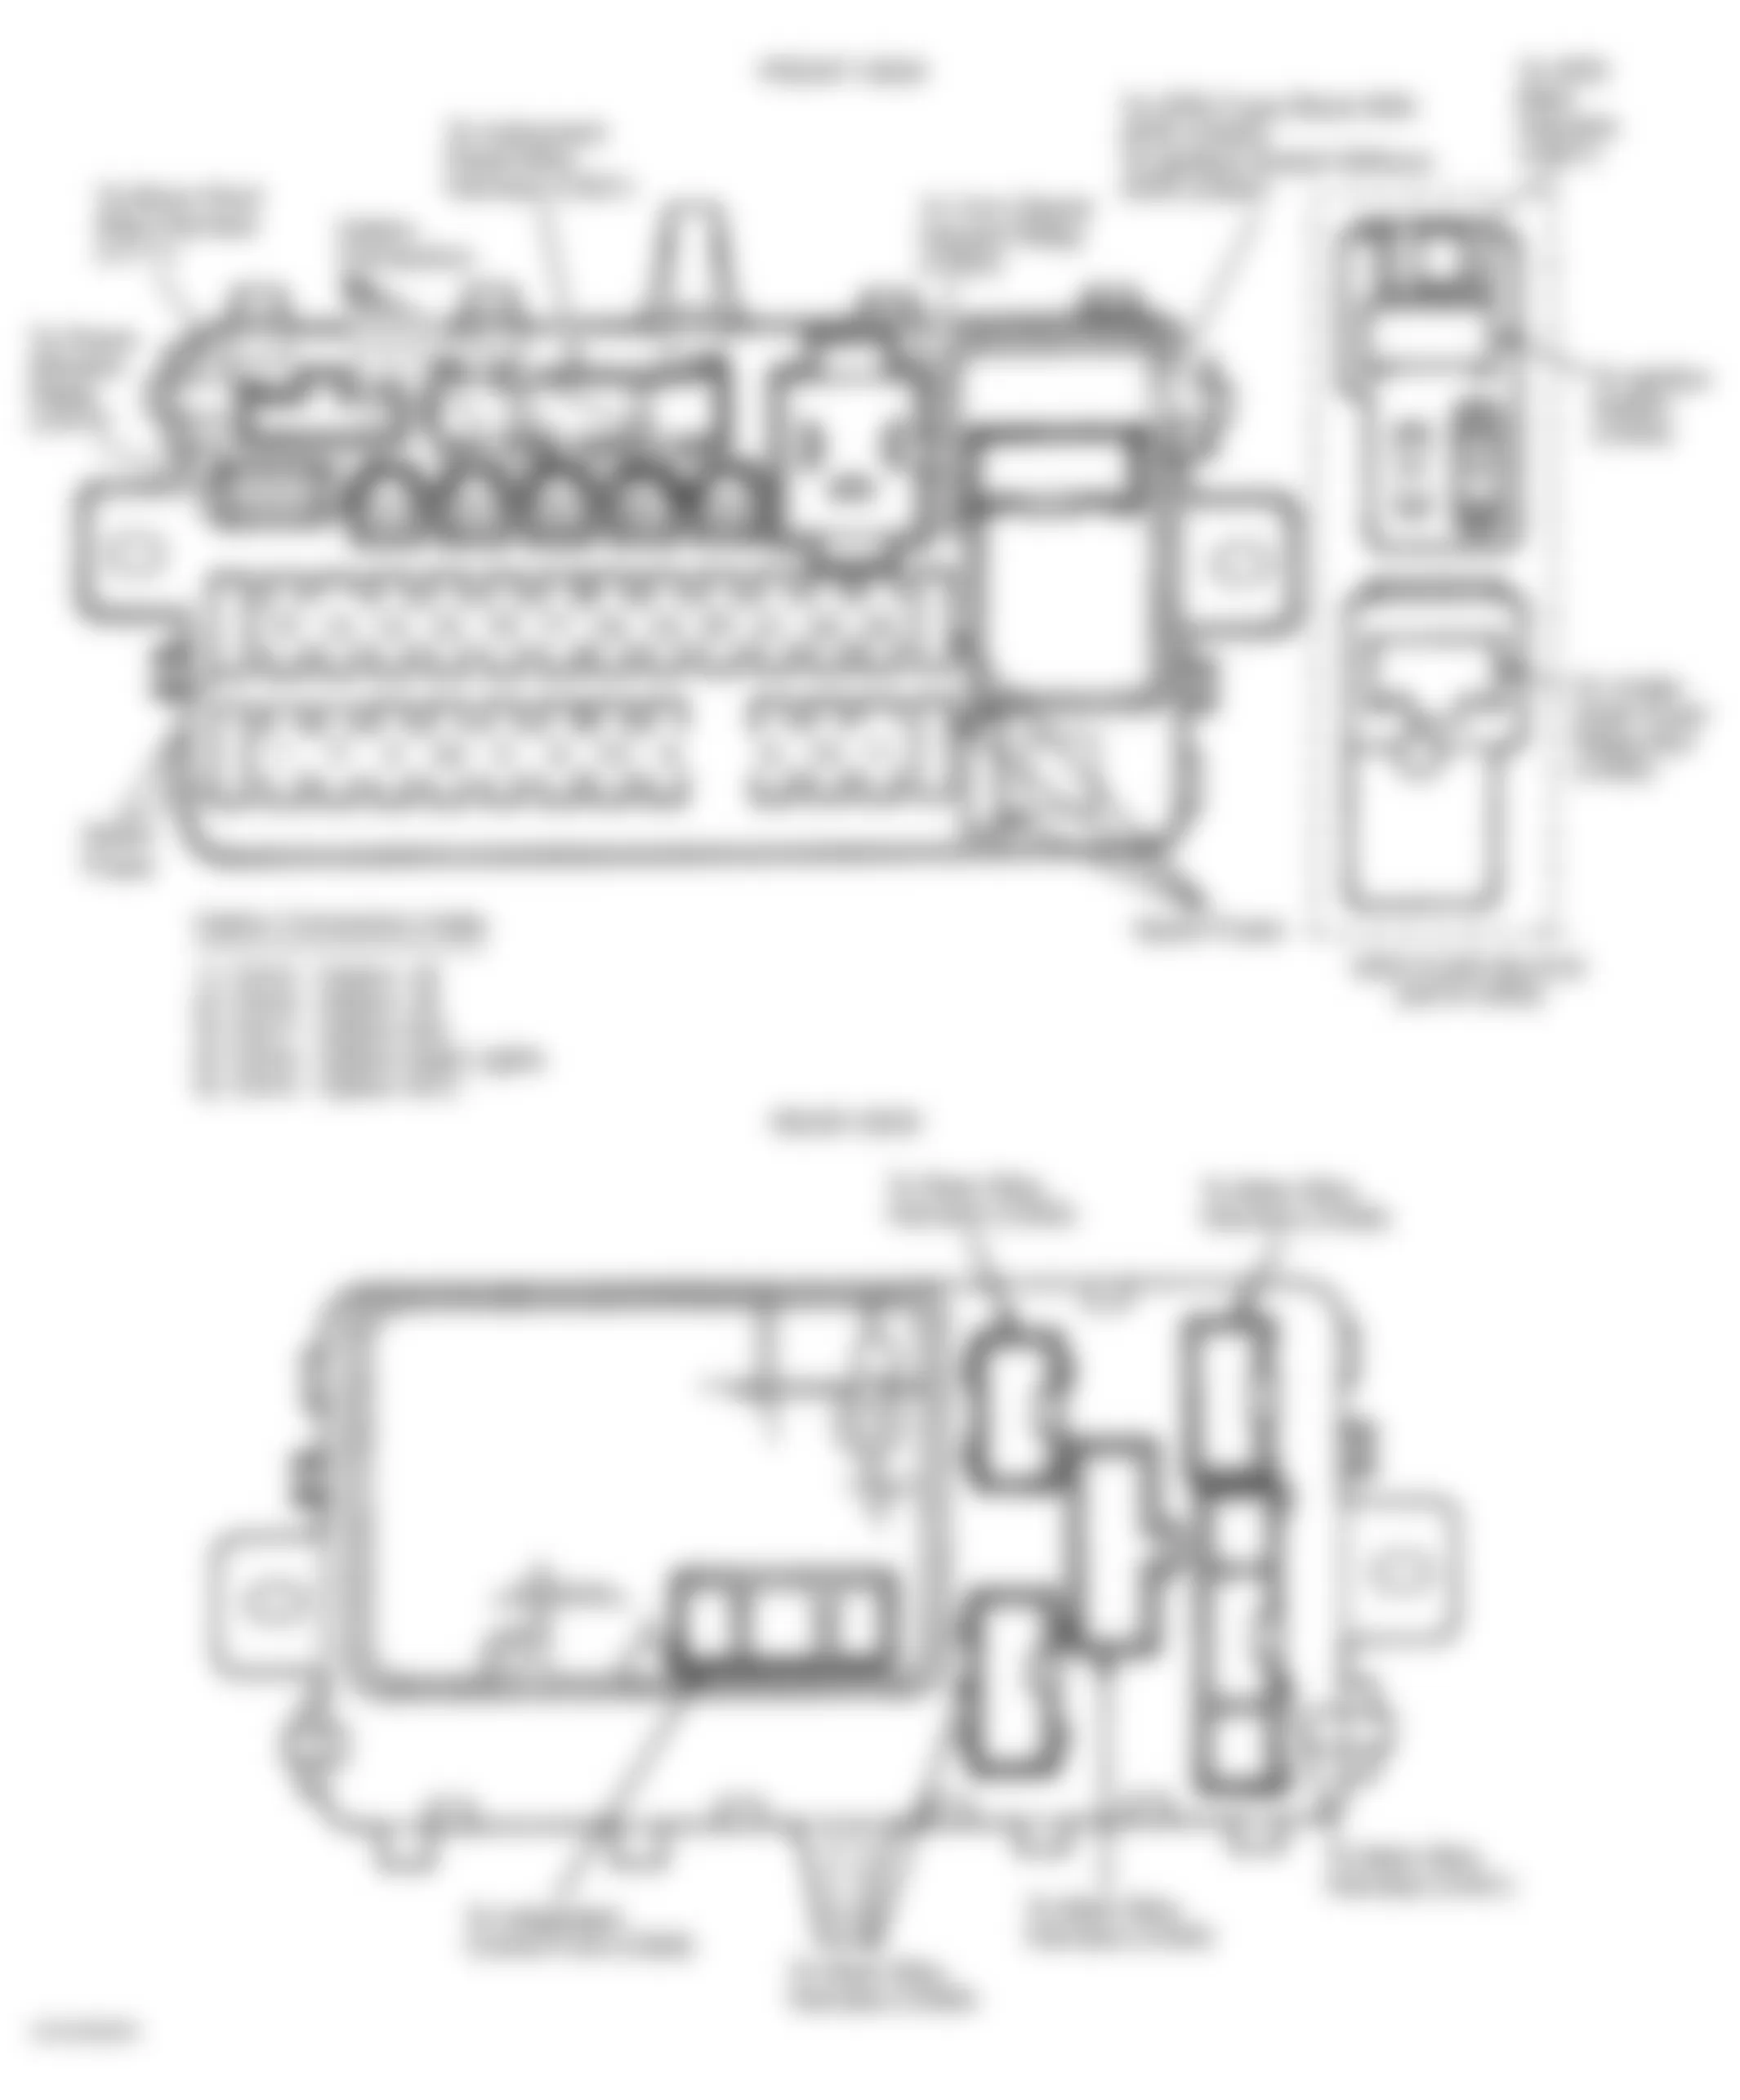 Honda Civic Si 1992 - Component Locations -  Identifying Under-Dash Fuse/Relay Box Components (1994-95 Civic)